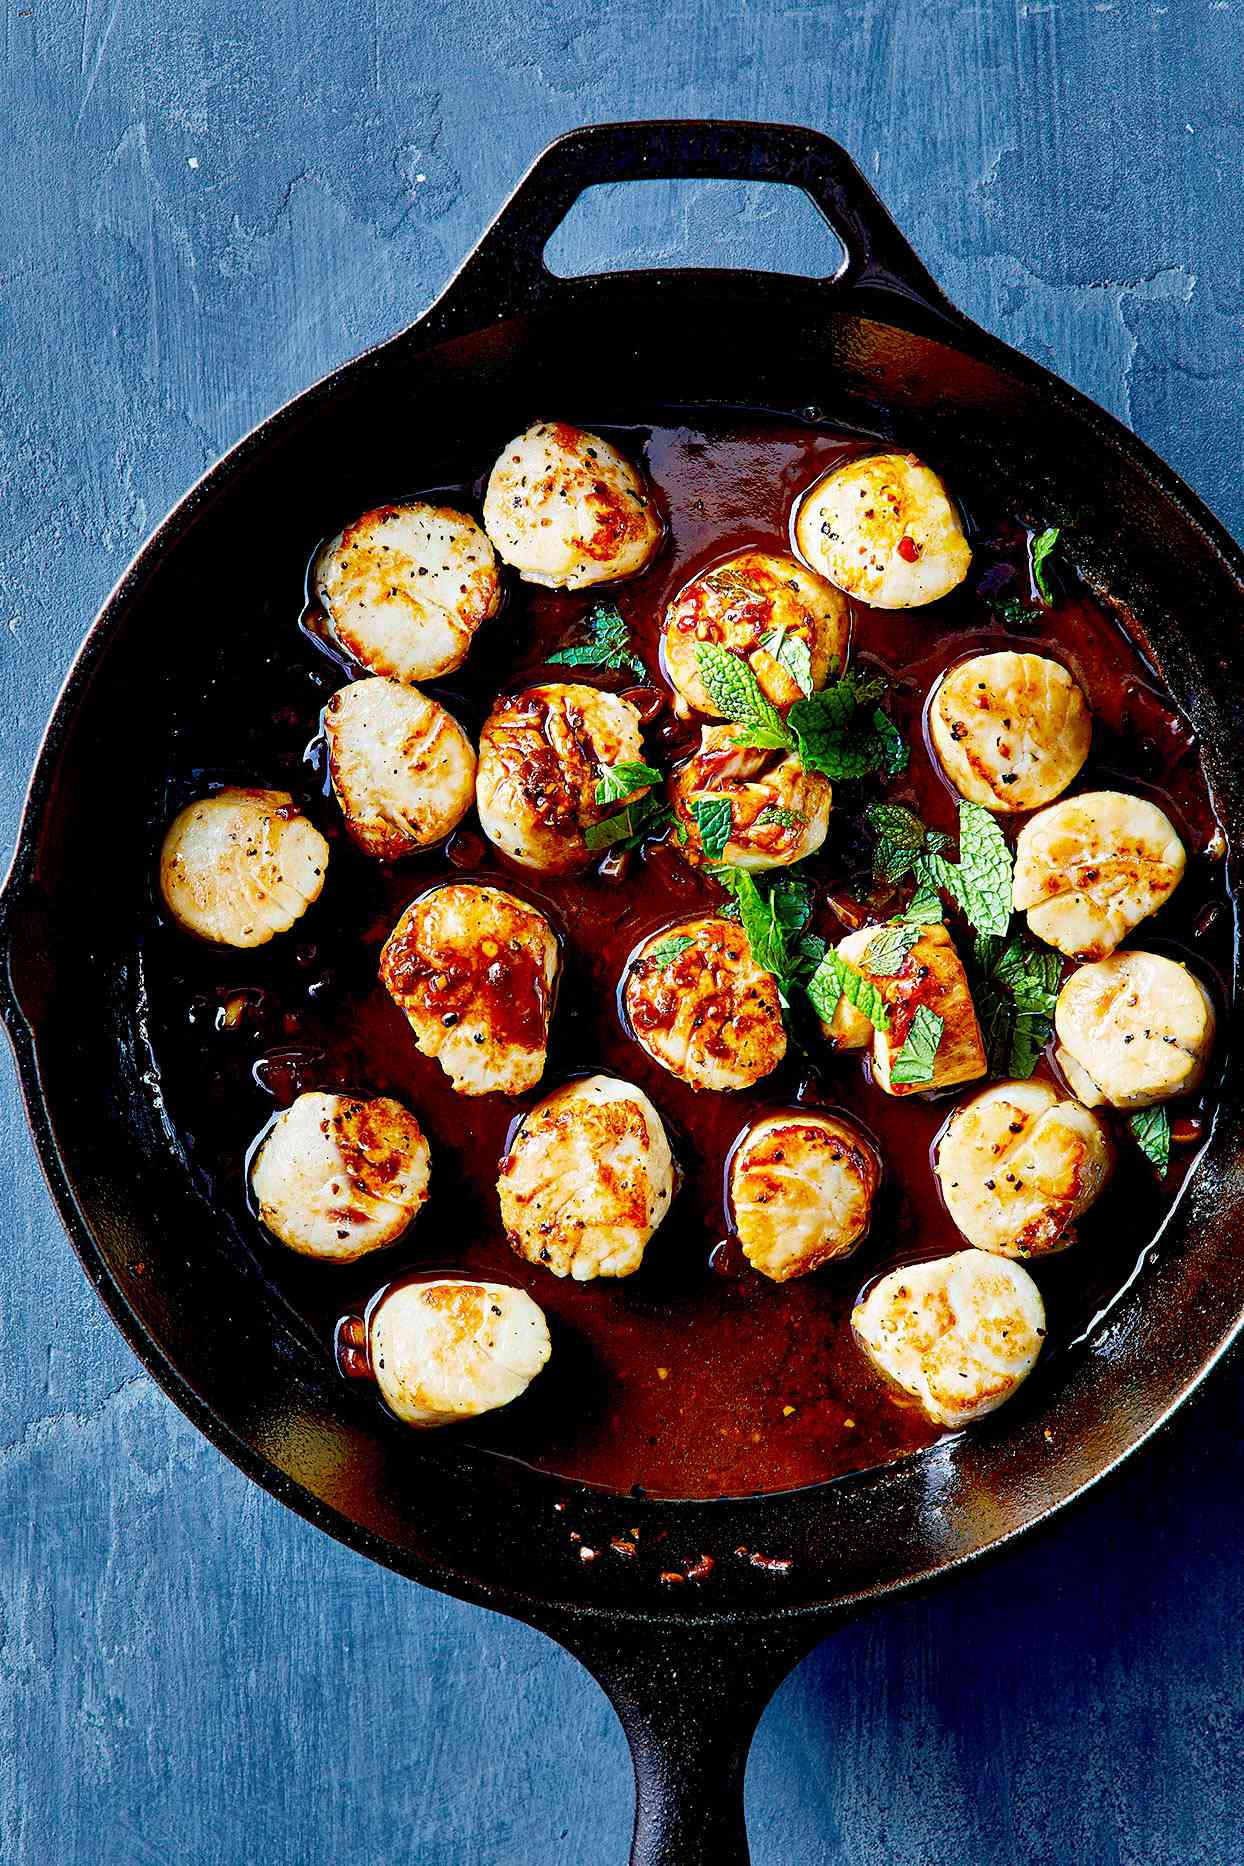 How to Cook Scallops so They're Never Rubbery | Better Homes & Gardens